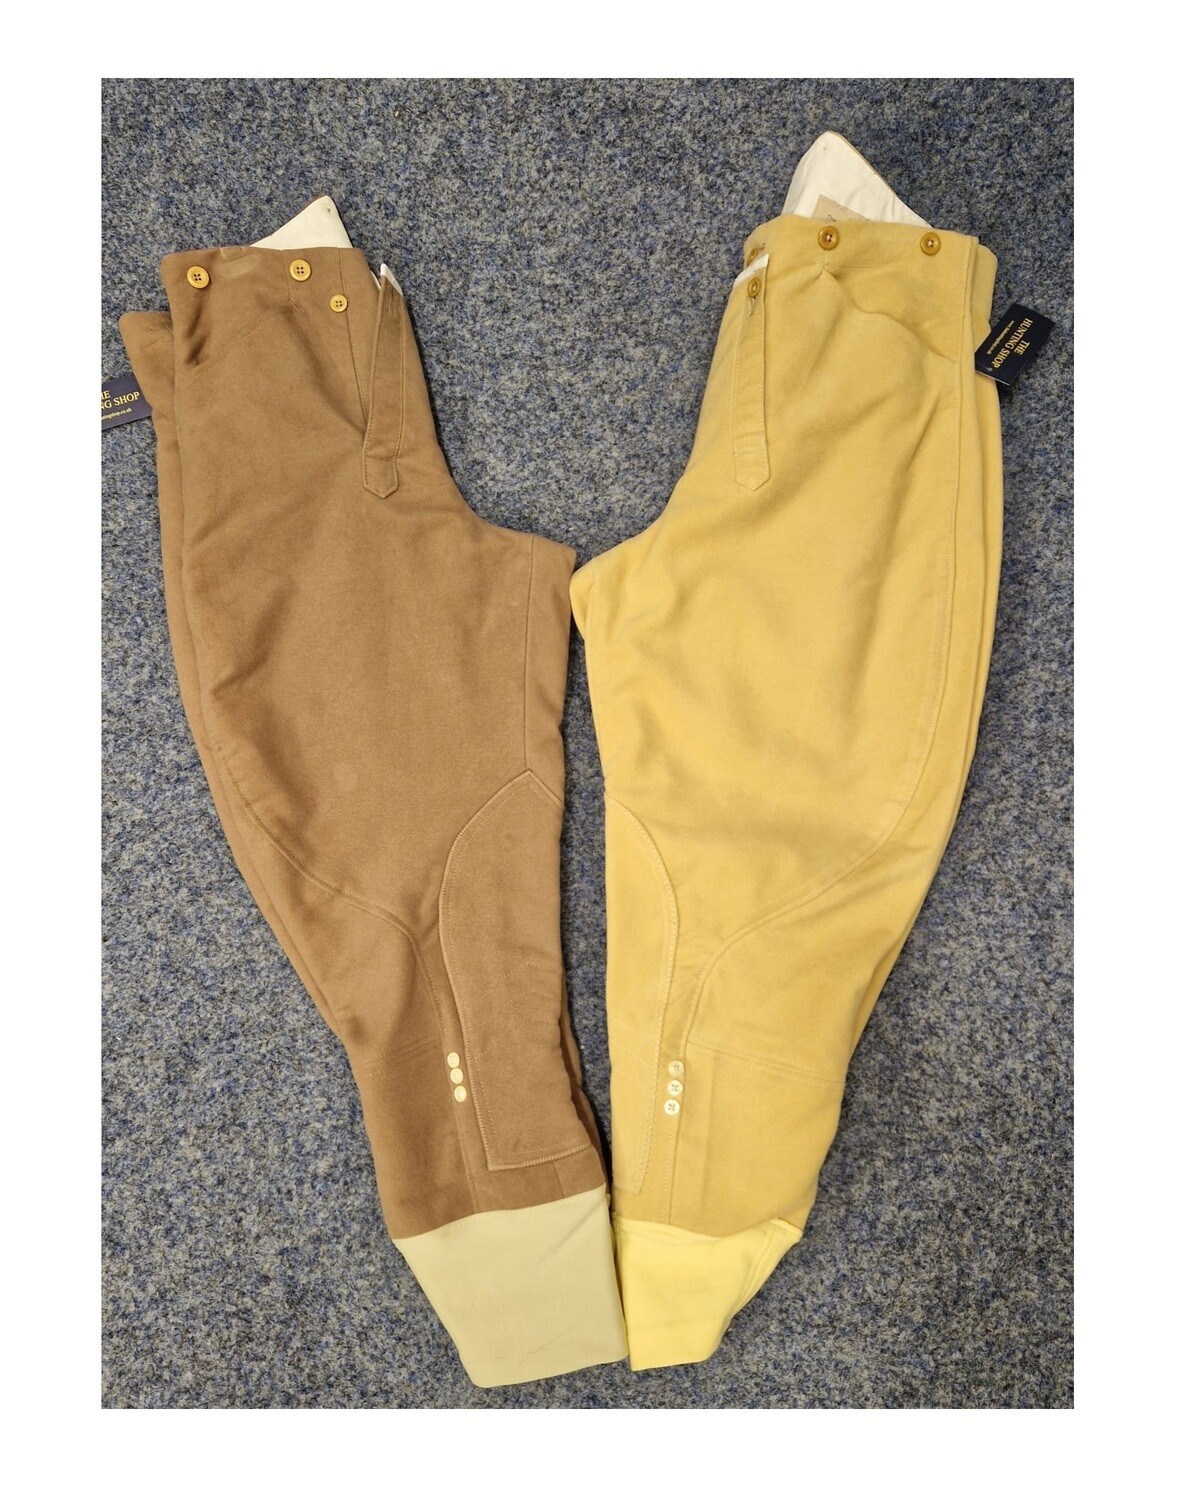 Gents 46" Taupe Moleskin Hunting Breeches - End of Season Sale, Colour: Taupe, Waist Size: 46"